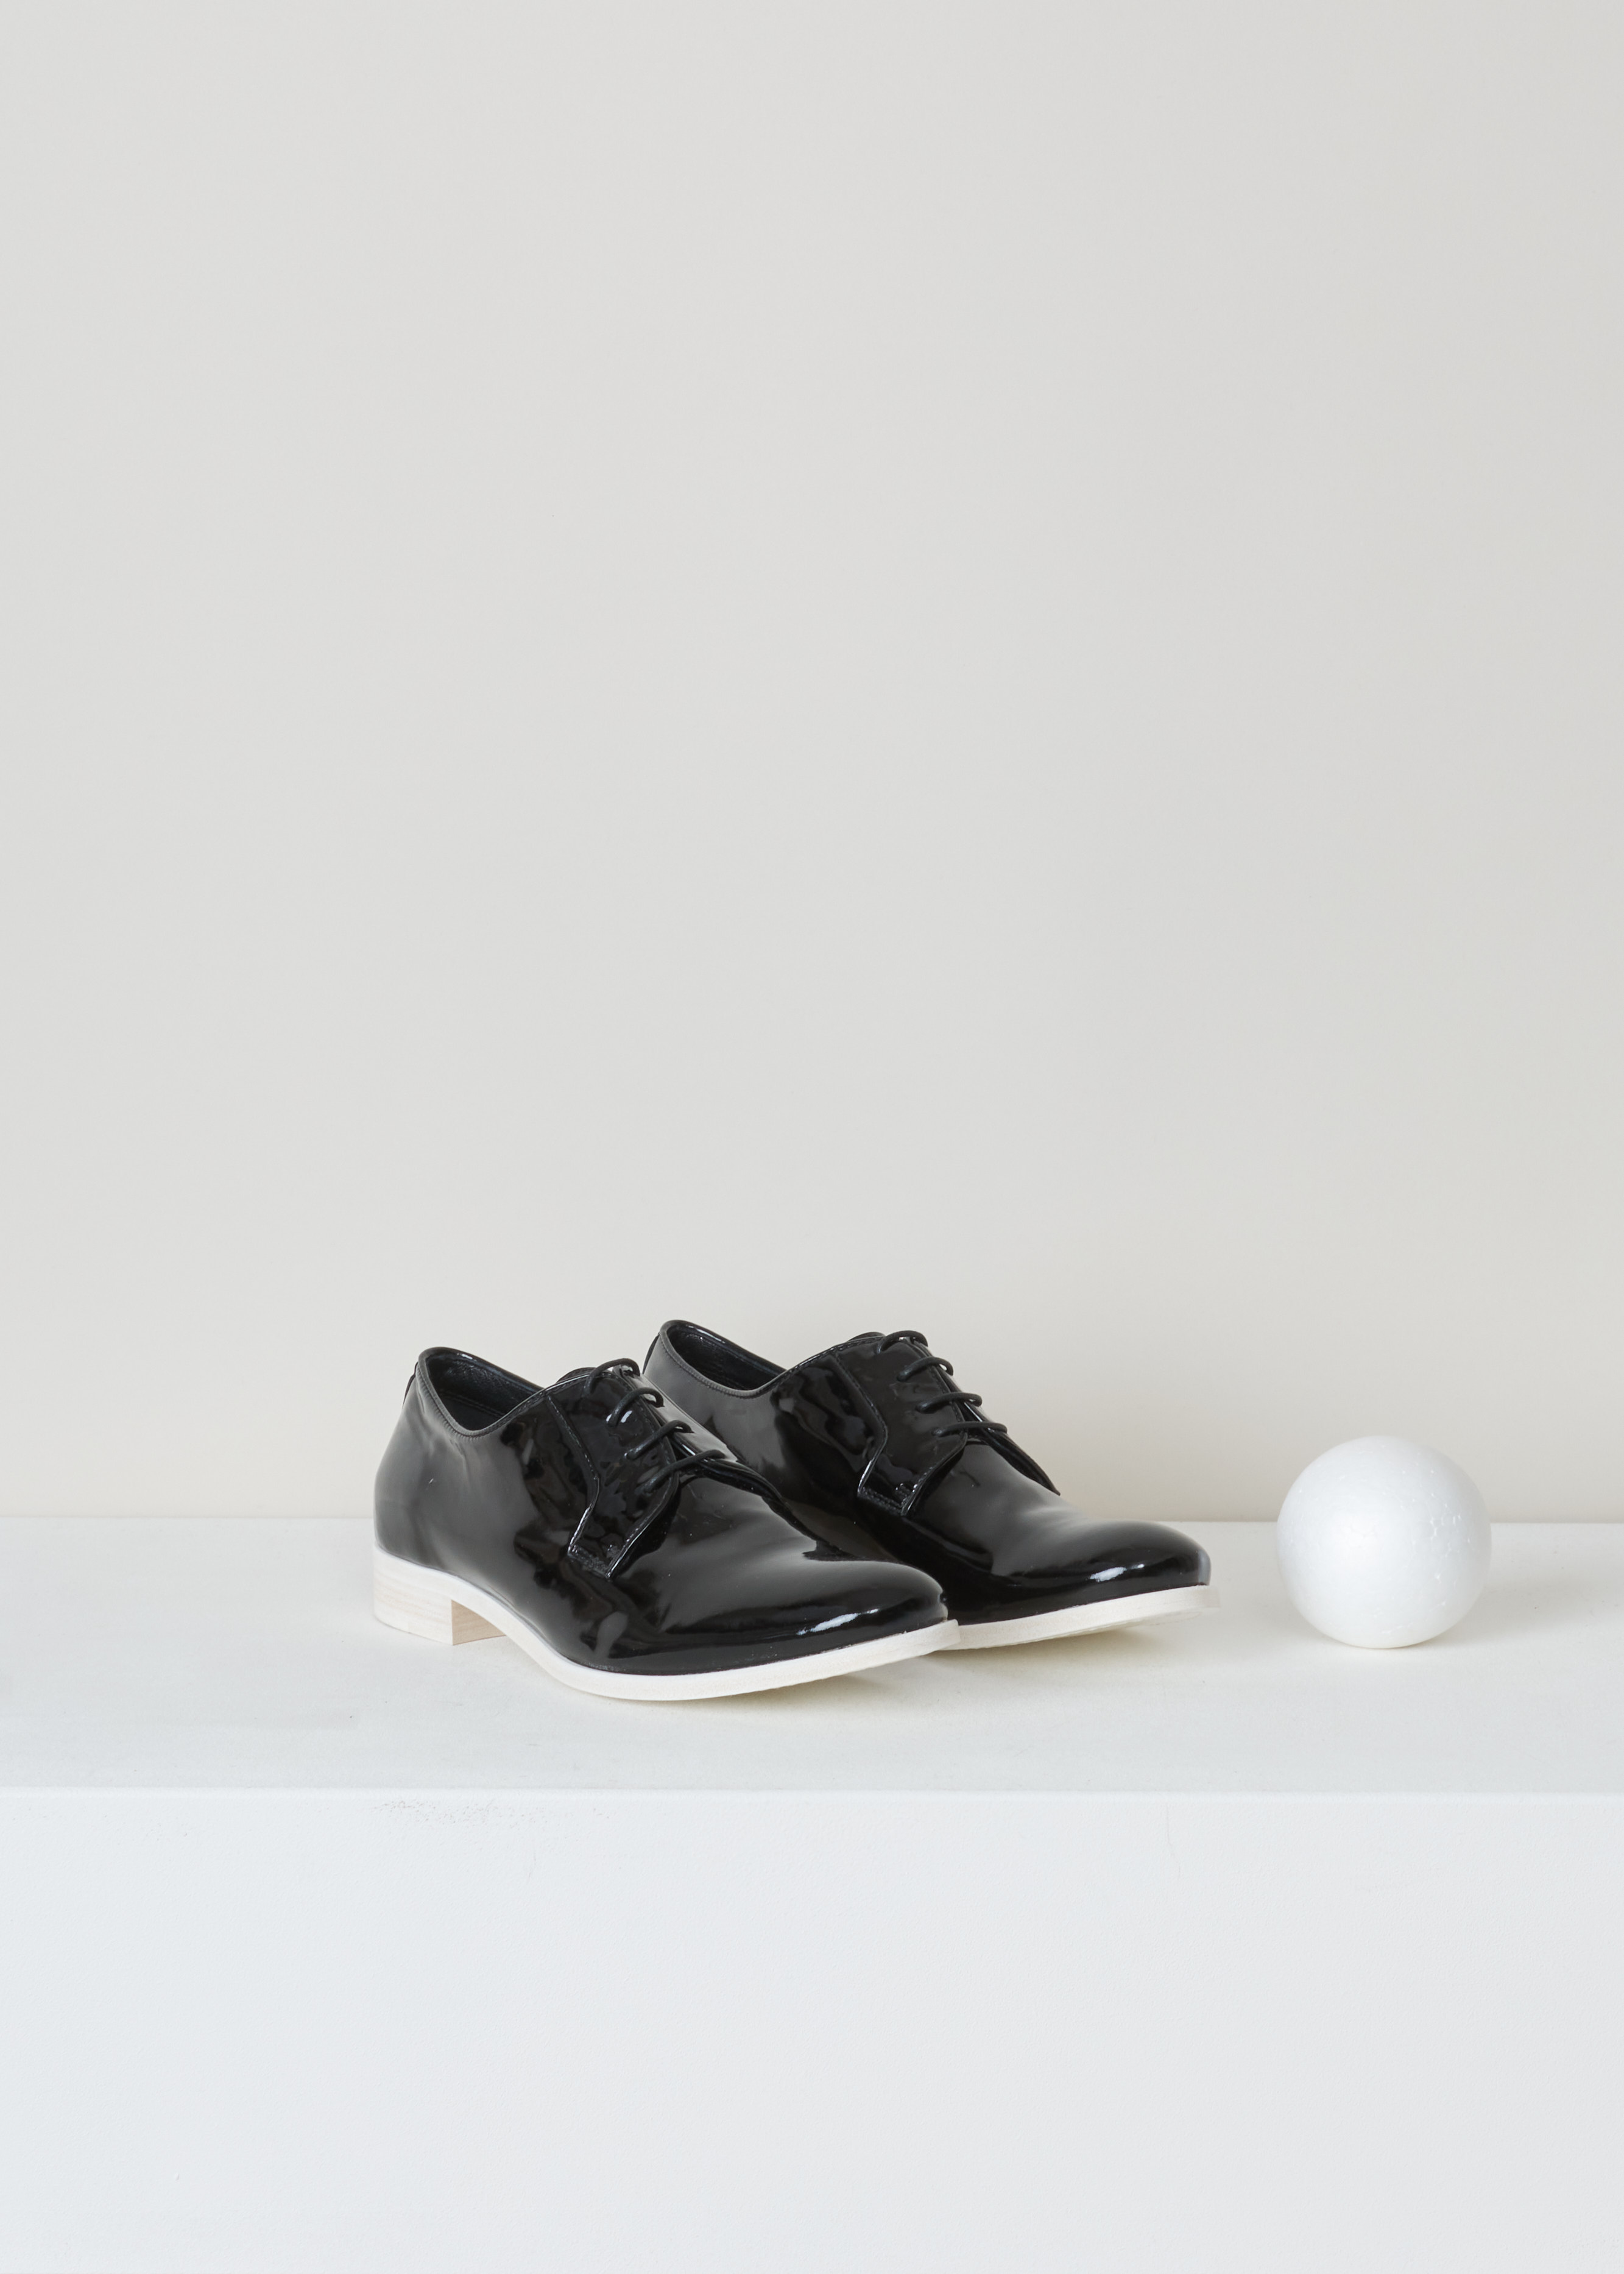 Jil Sander Patent leather lace-up shoes JS18361_999 black front. Black patent leather lace-up shoe with a rounded toe and a white leather sole.